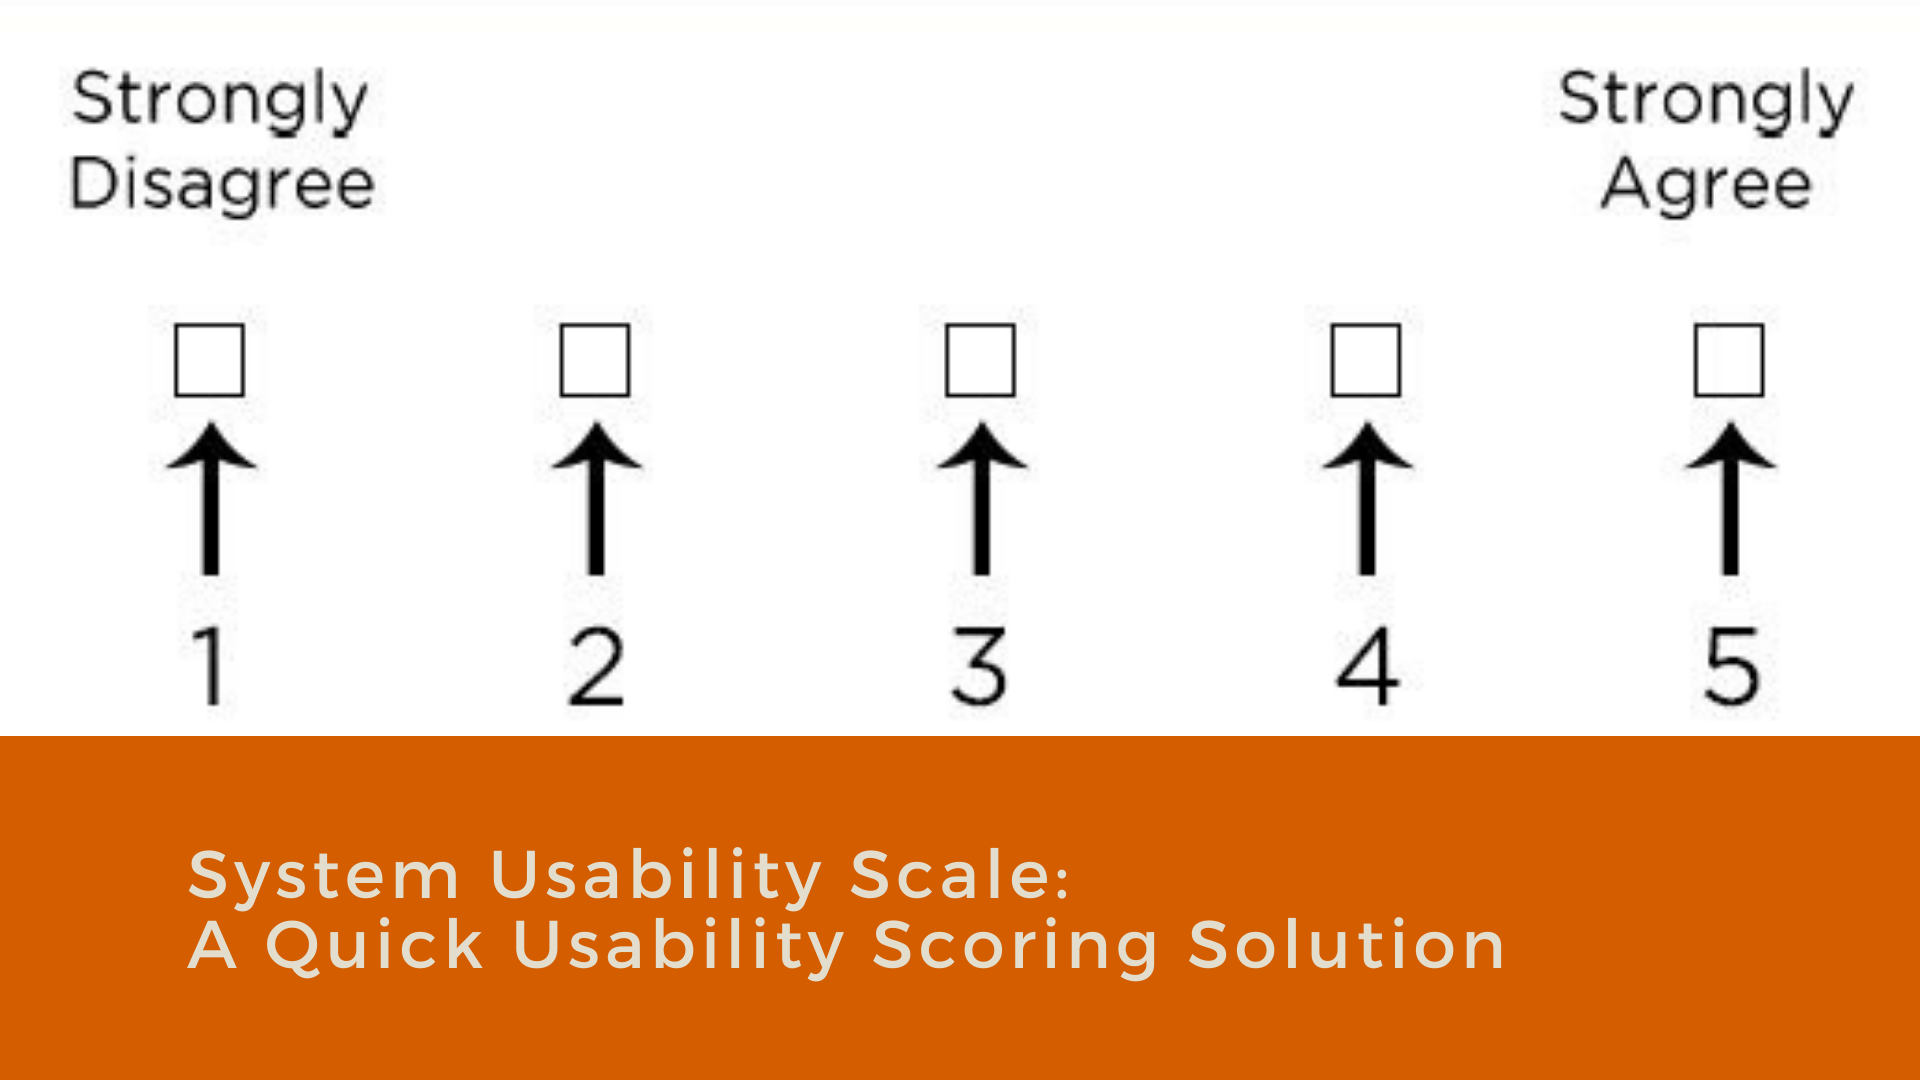 System Usability Scale: A Quick Usability Scoring Solution